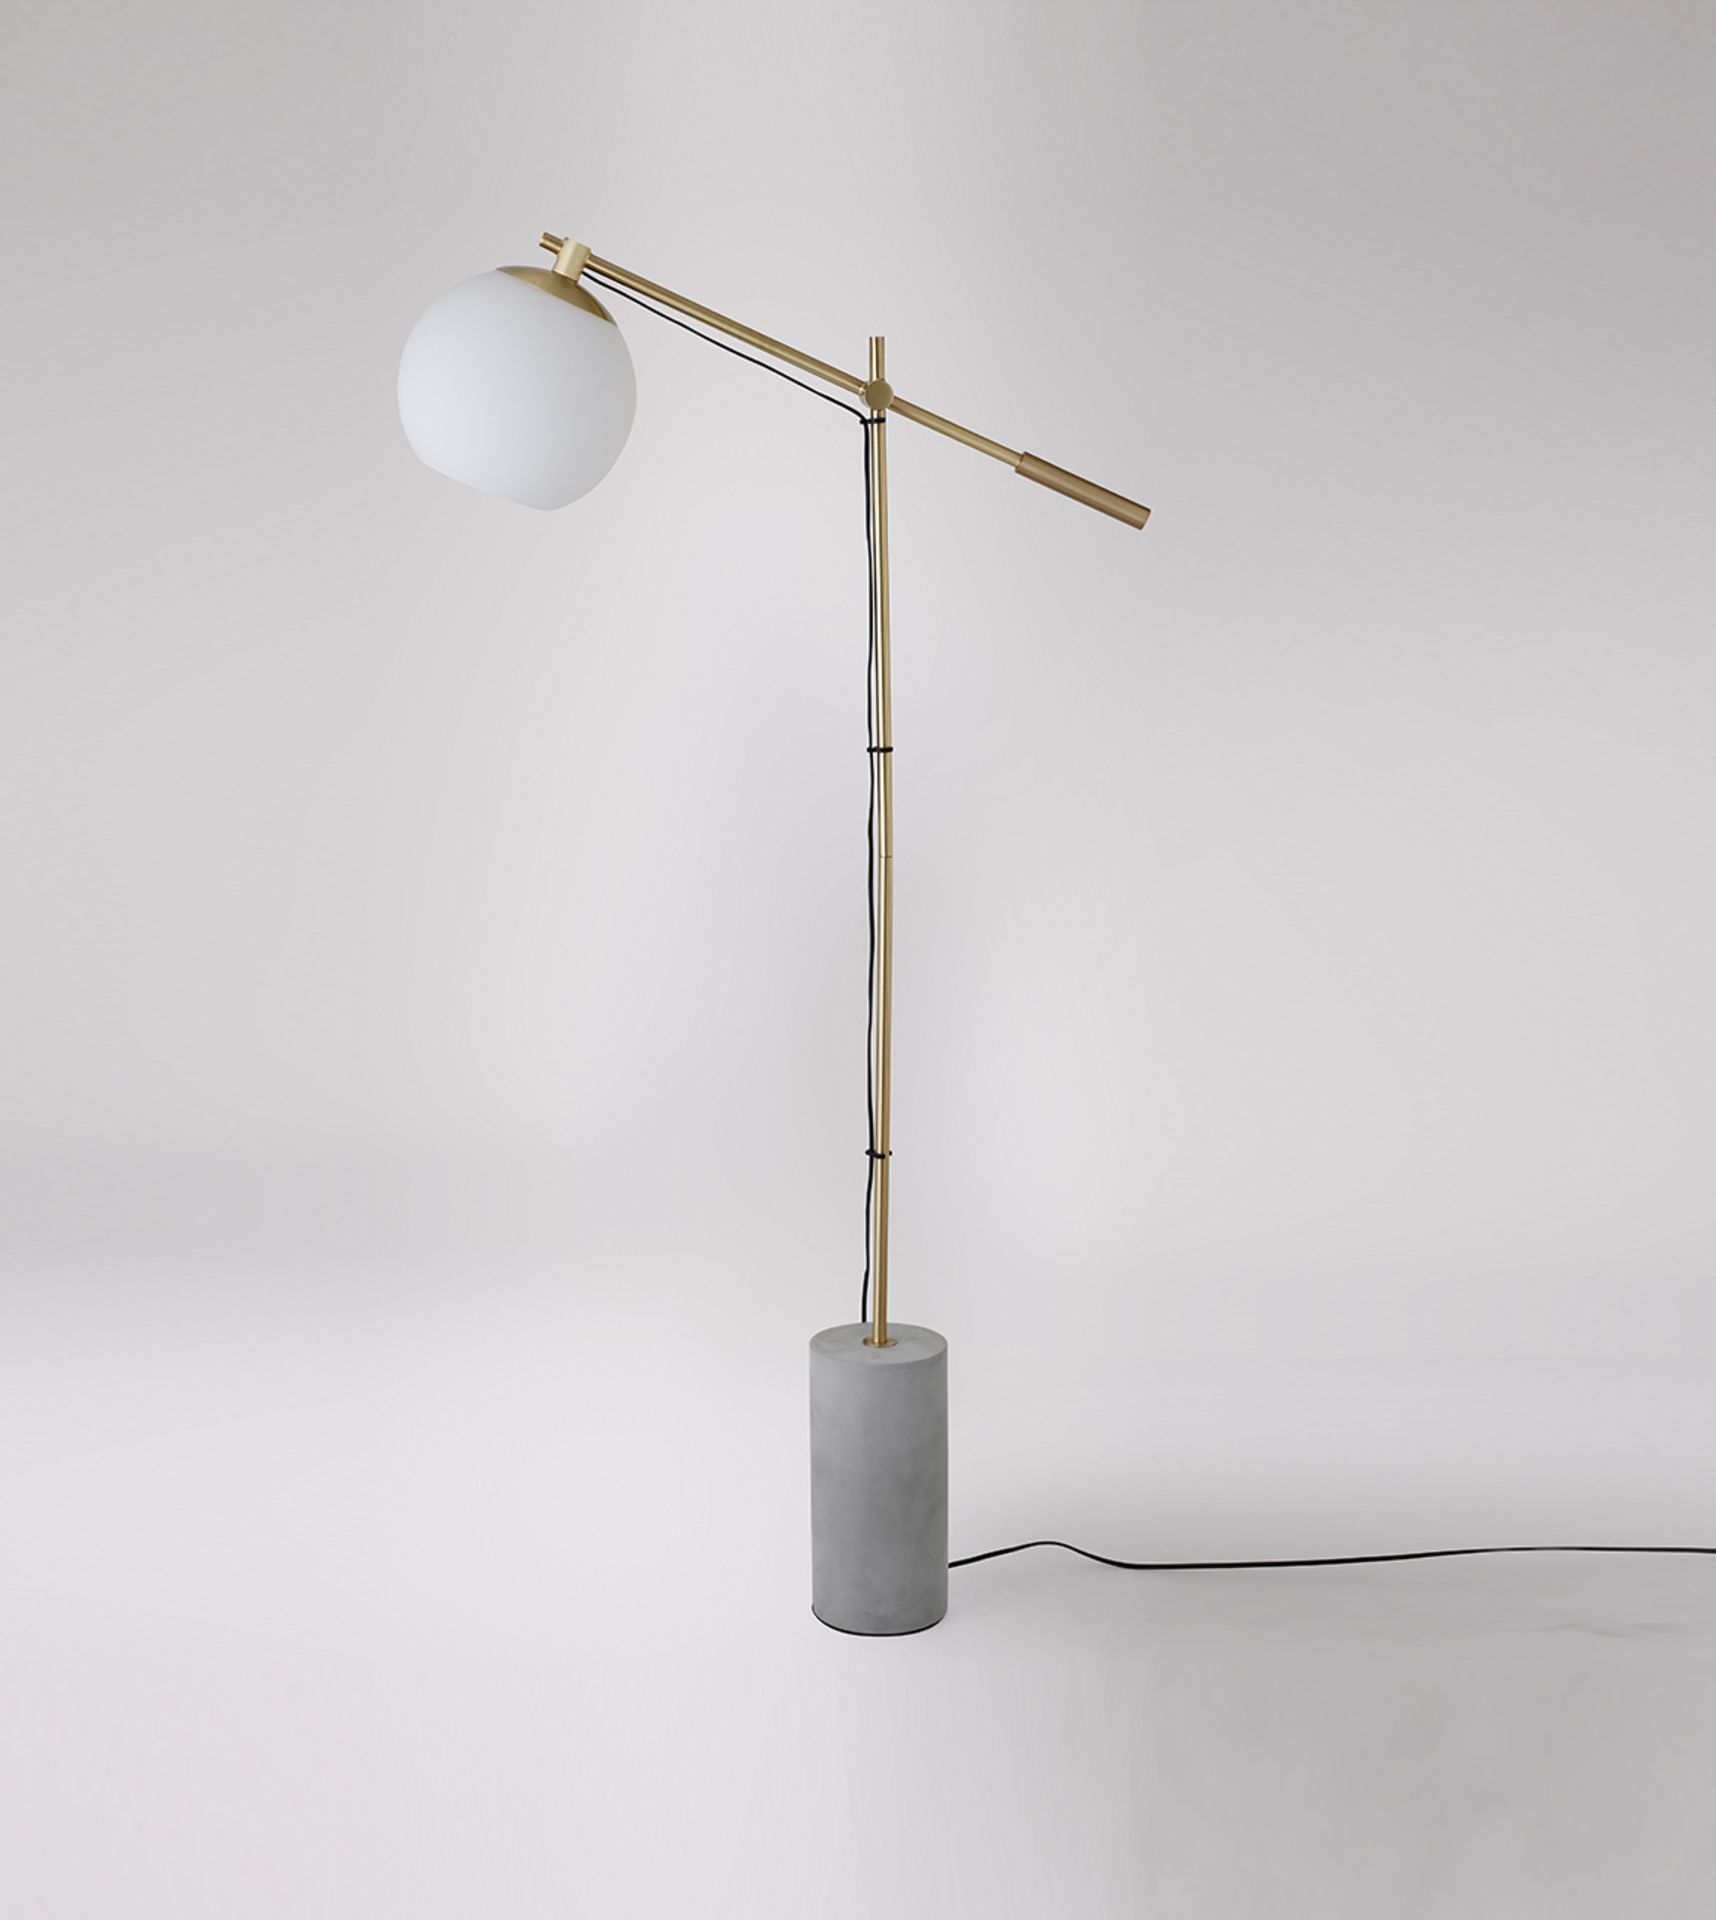 Shade for Swoon Rhe Floor Lamp Concrete and Brass RRP £199.00 - Image 2 of 2